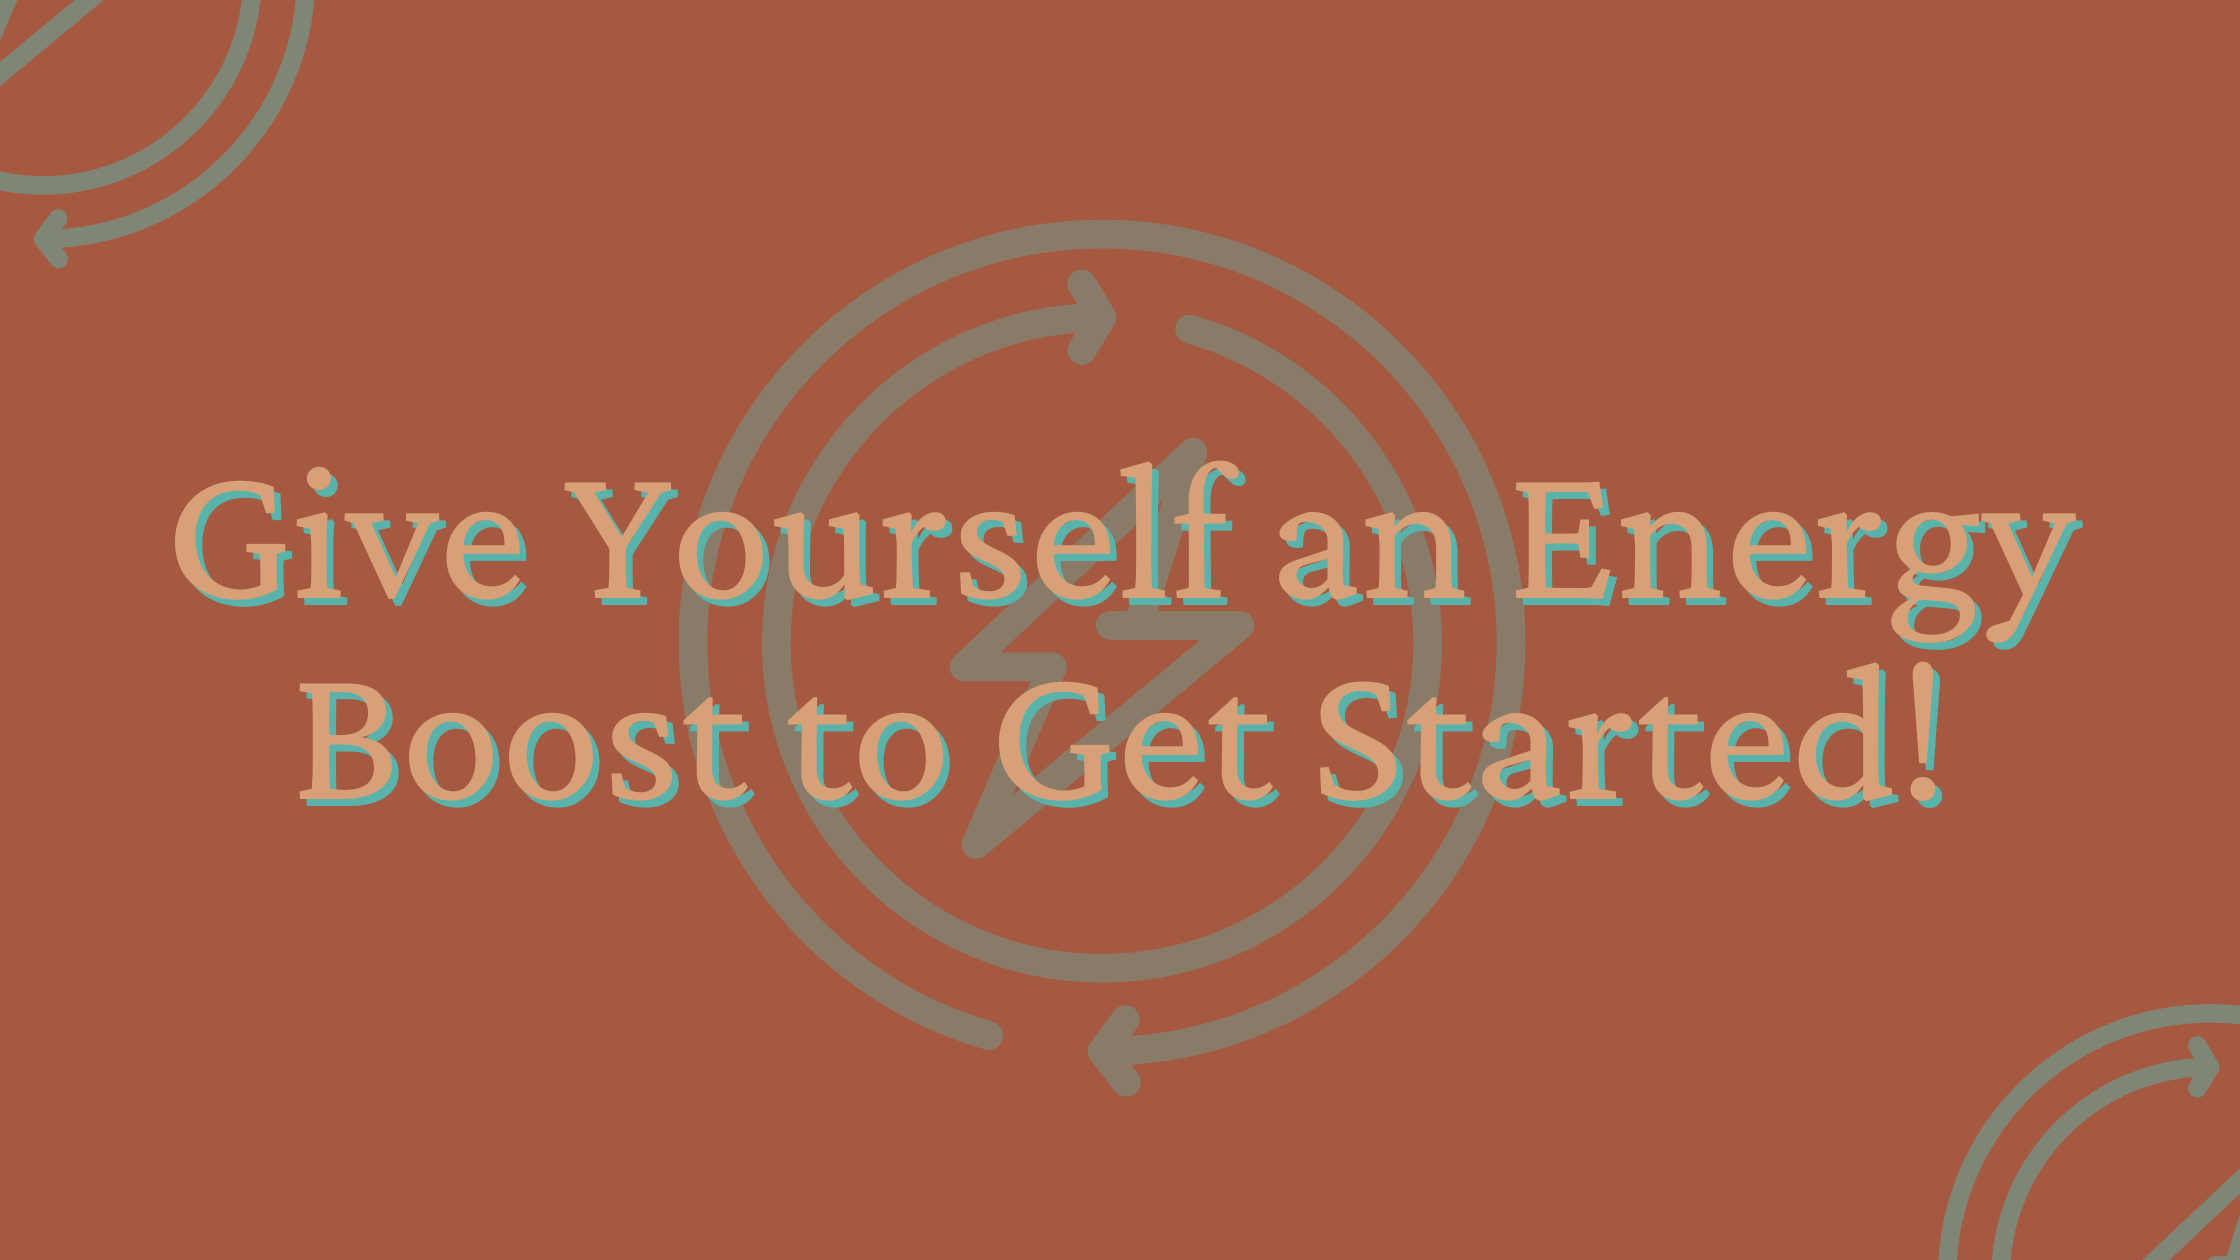 Give yourself an energy boost to get started